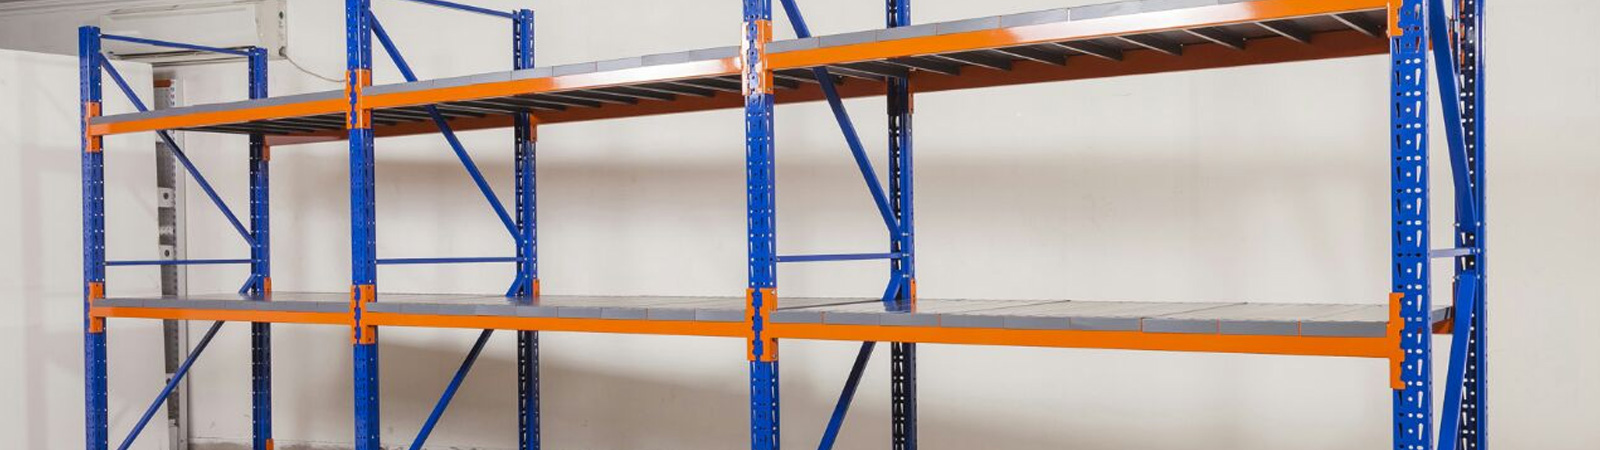 Heavy Duty Rack Manufacturers In Faridabad